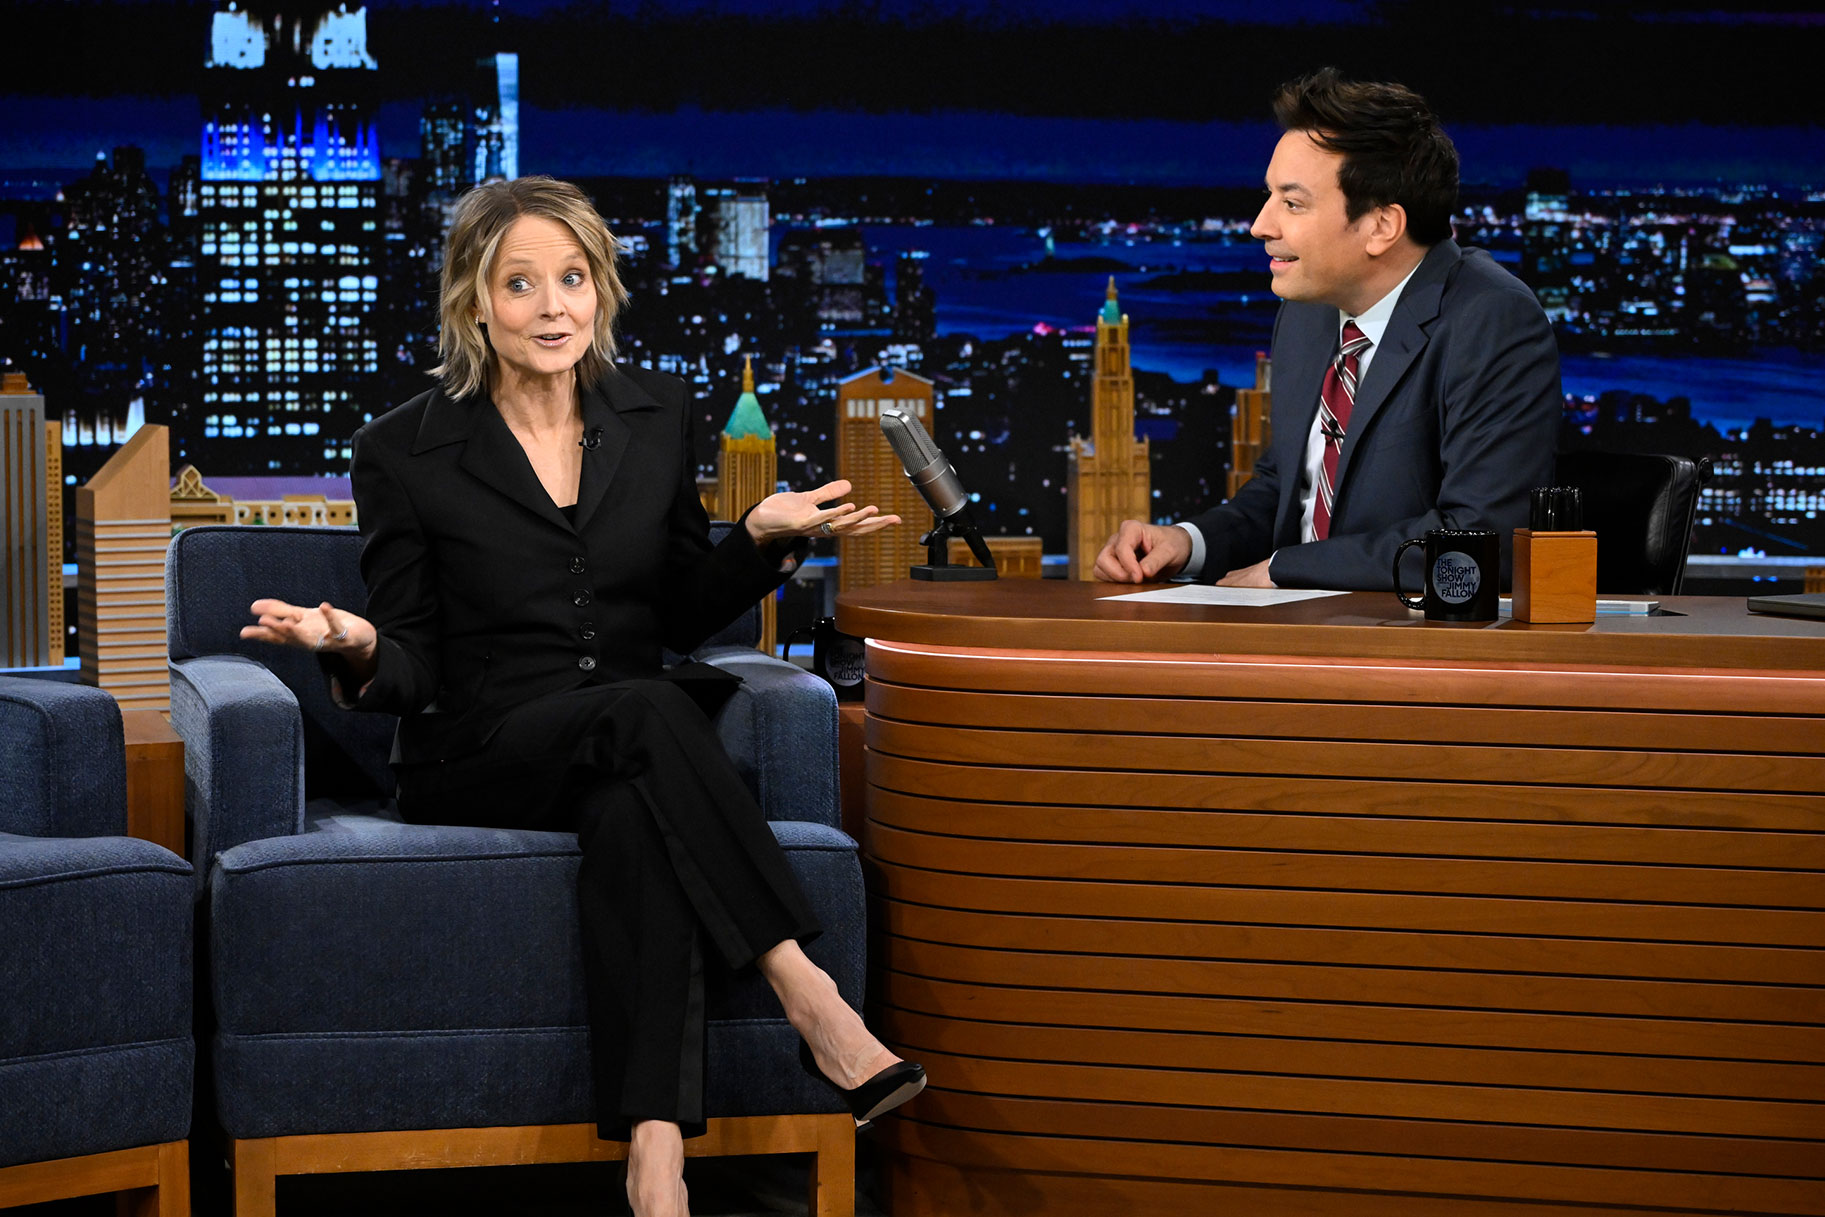 Jodie Foster Almost Played Princess Leia, She Told Jimmy Fallon